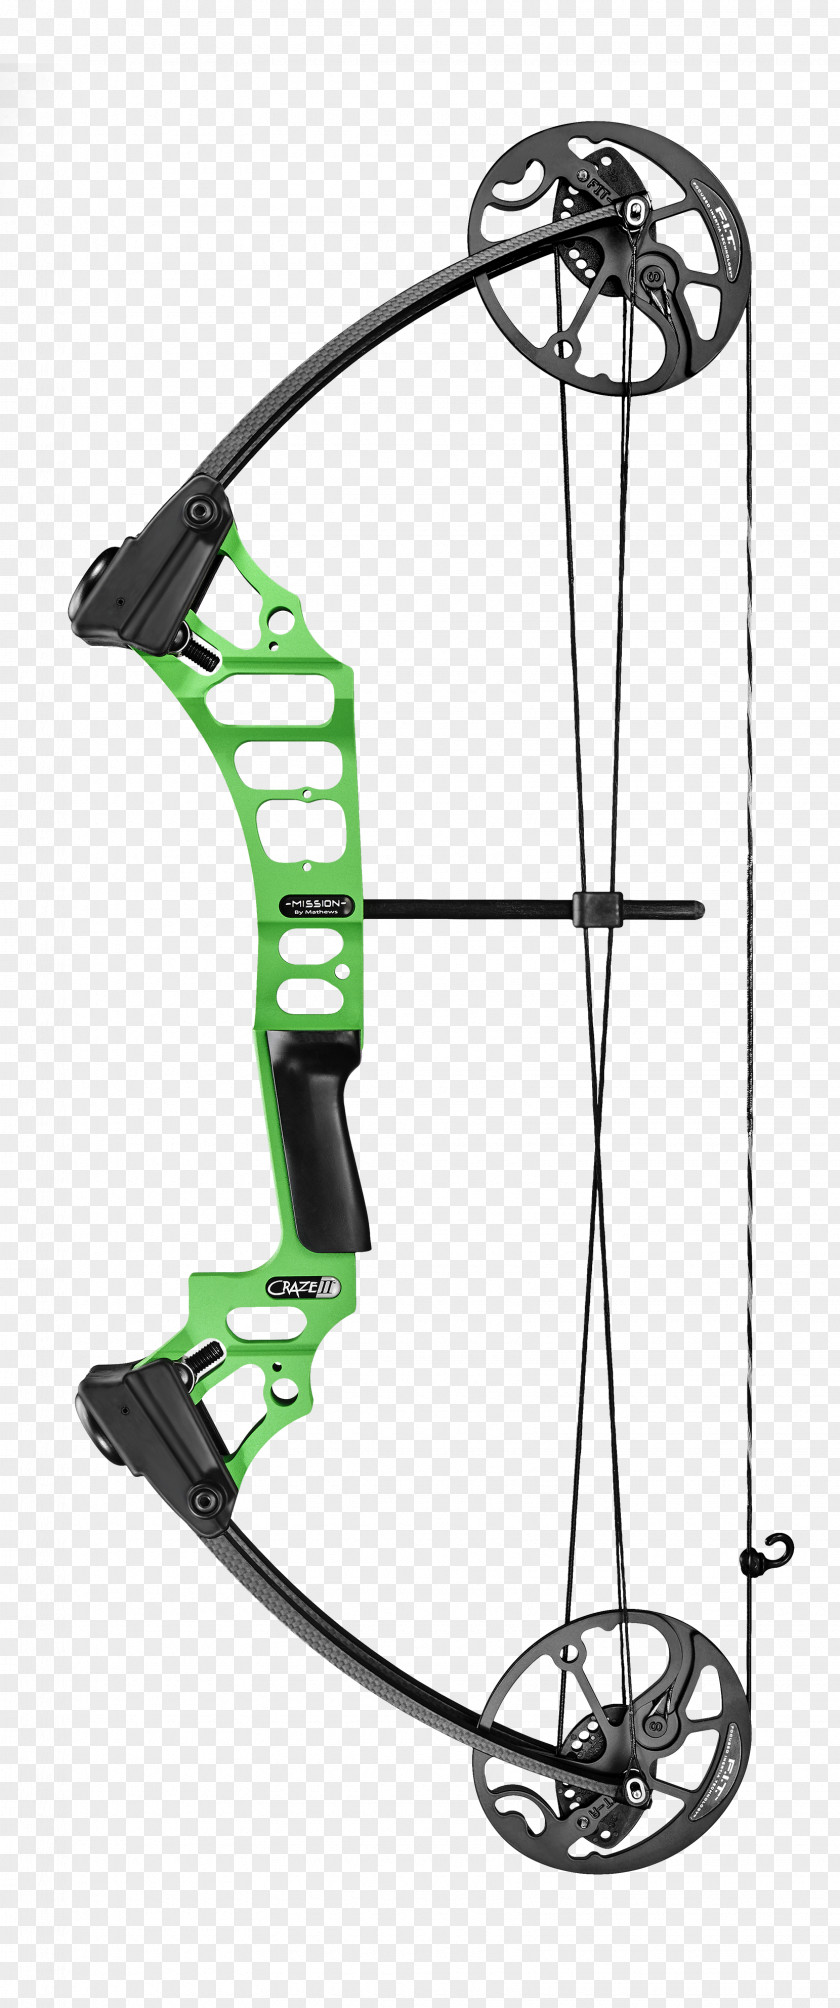 Archery Compound Bows Bow And Arrow PSE Bowhunting PNG